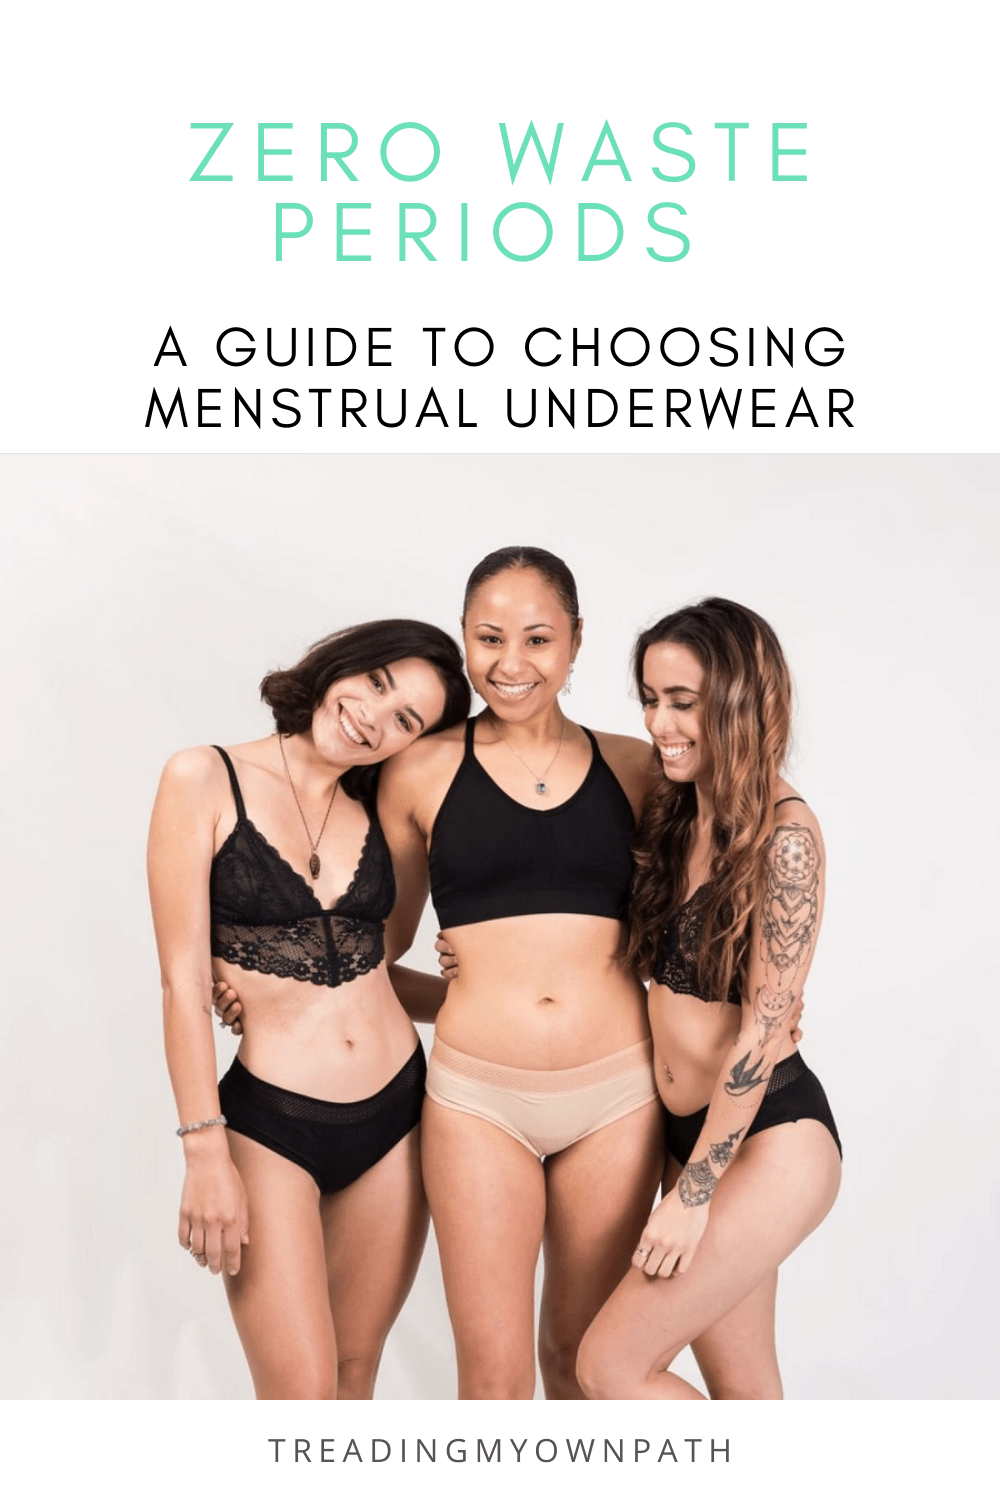 Zero waste periods: the pros and cons of menstrual underwear (+ 6 brands to consider)